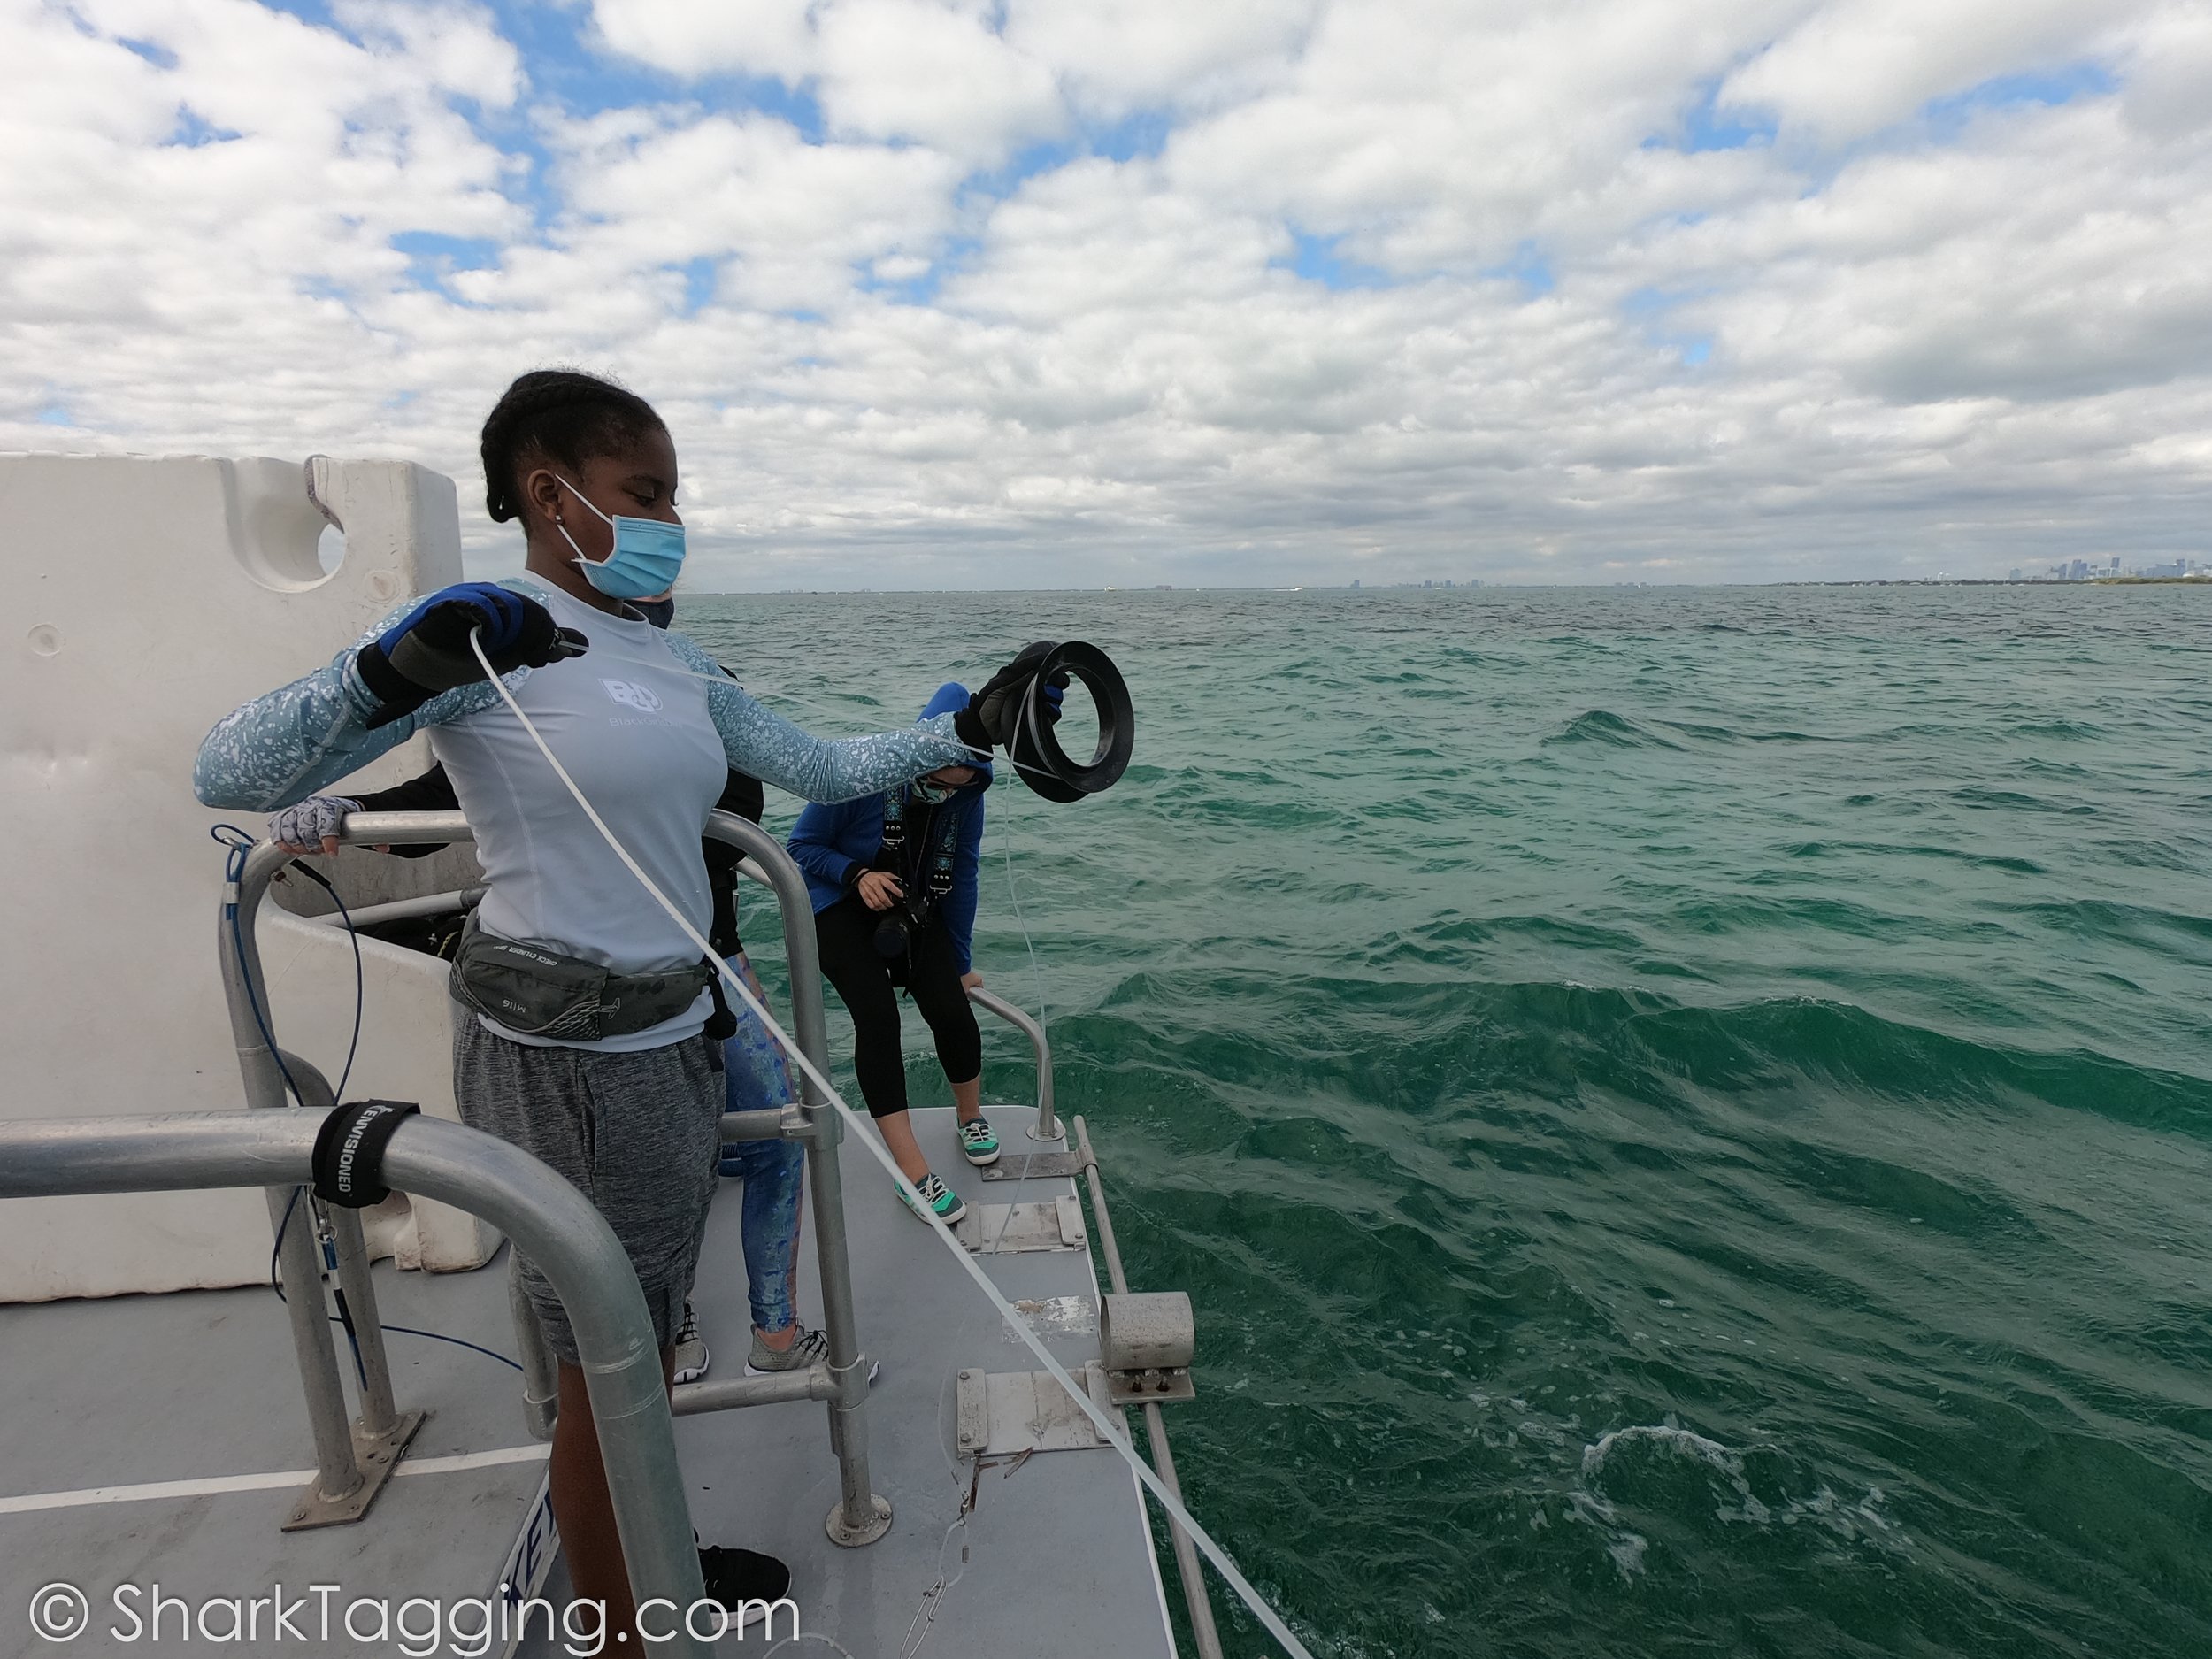 BGD Scholar Alex is checking her shark line to see if anything is at the end.